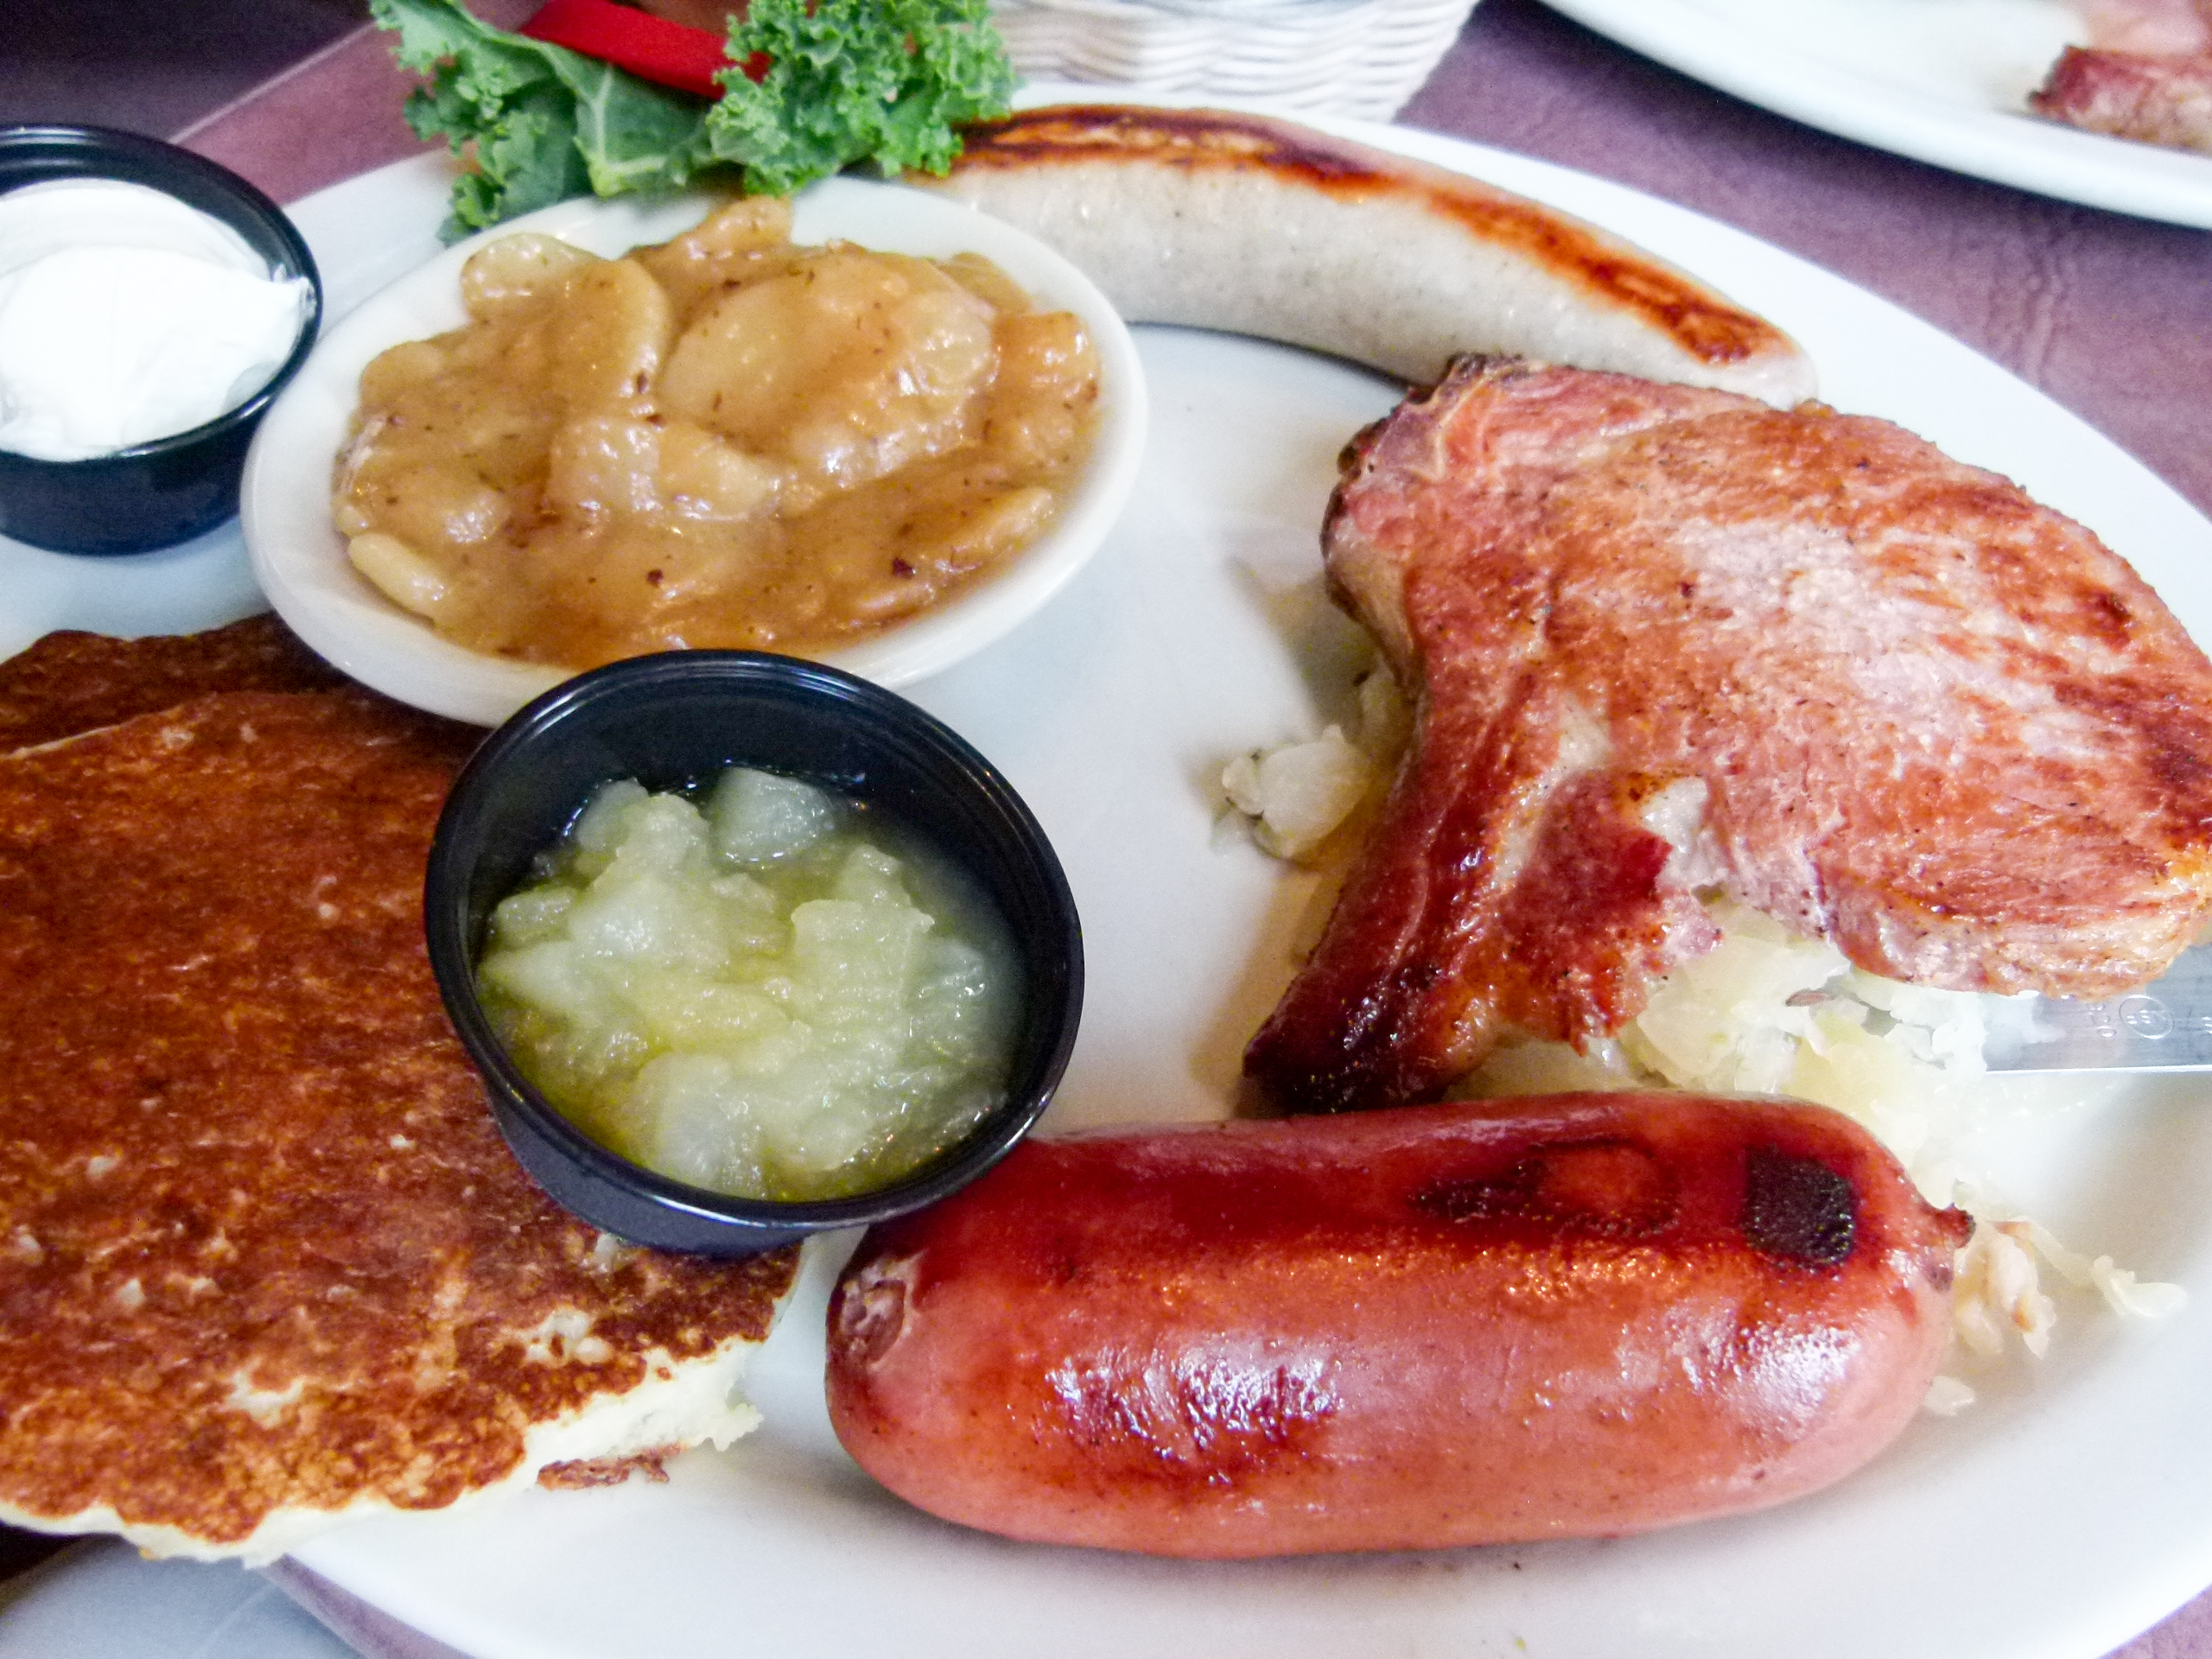 The Bavarian Peasant Platter with (top to bottom) grilled bratwurst, smoked pork loin chop, and knackwurst accompanied by German potato salad, and potato pancakes with apple sauce and sour cream.